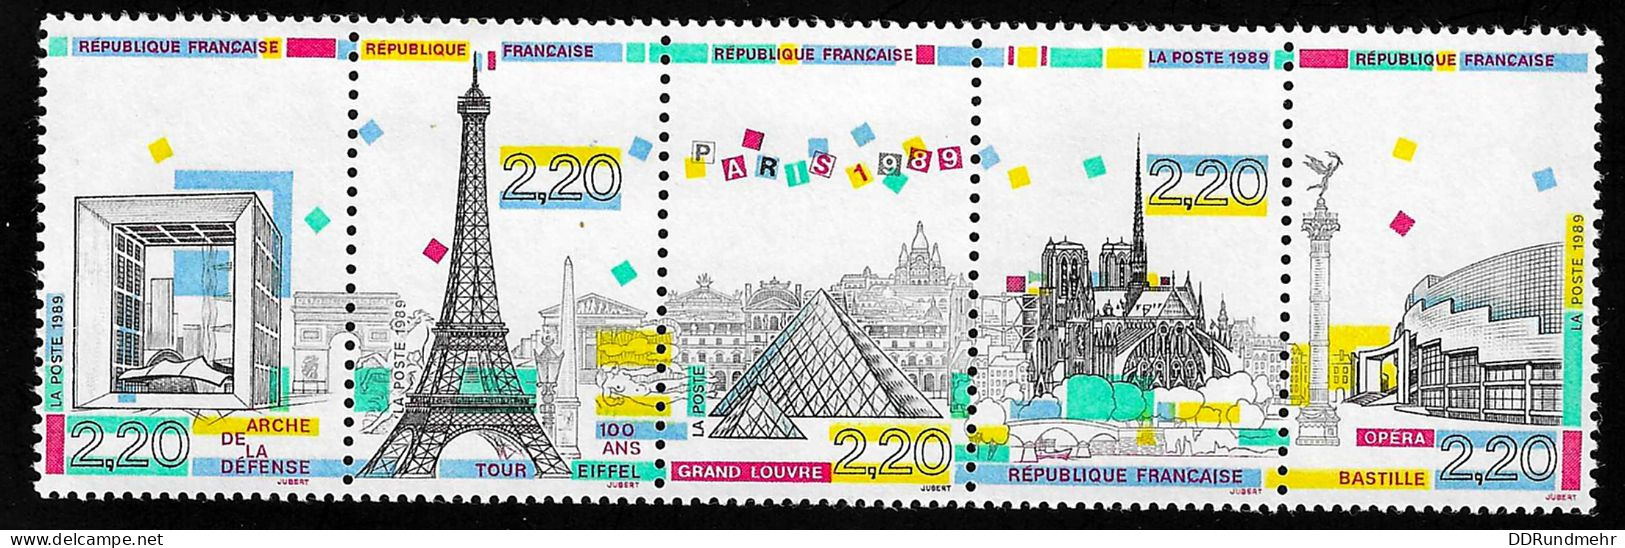 1989 Panorama Of Paris  Yvert Et Tellier FR BC2583A Michel FR 2710-2714 Stamp Number FR 2151a Xx MNH - Unused Stamps